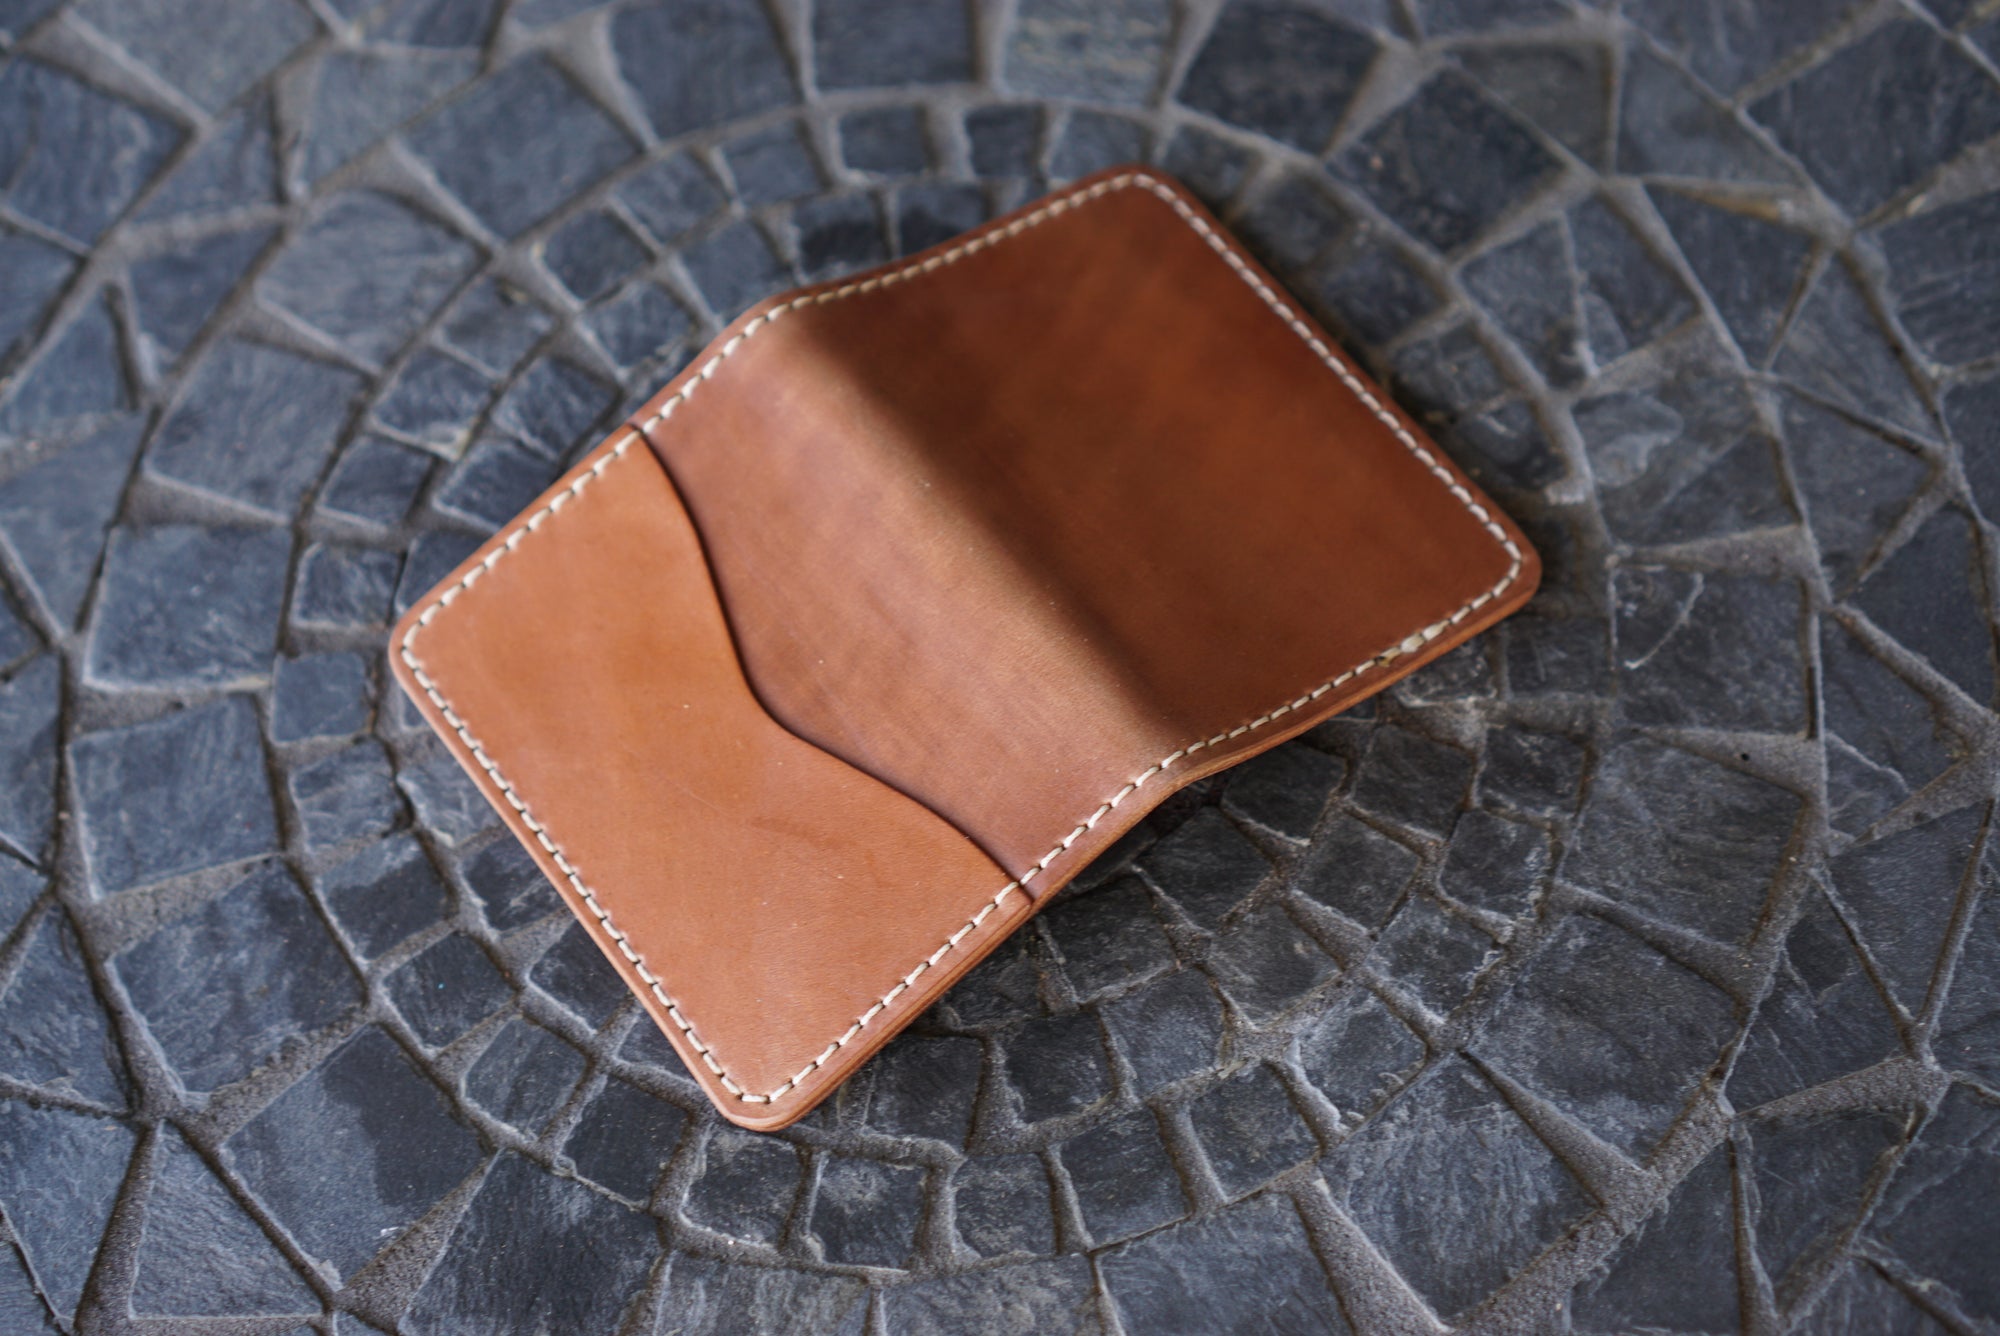 Warden - Horween Unglazed Natural Shell Cordovan and Natural Chromexcel Horsehide